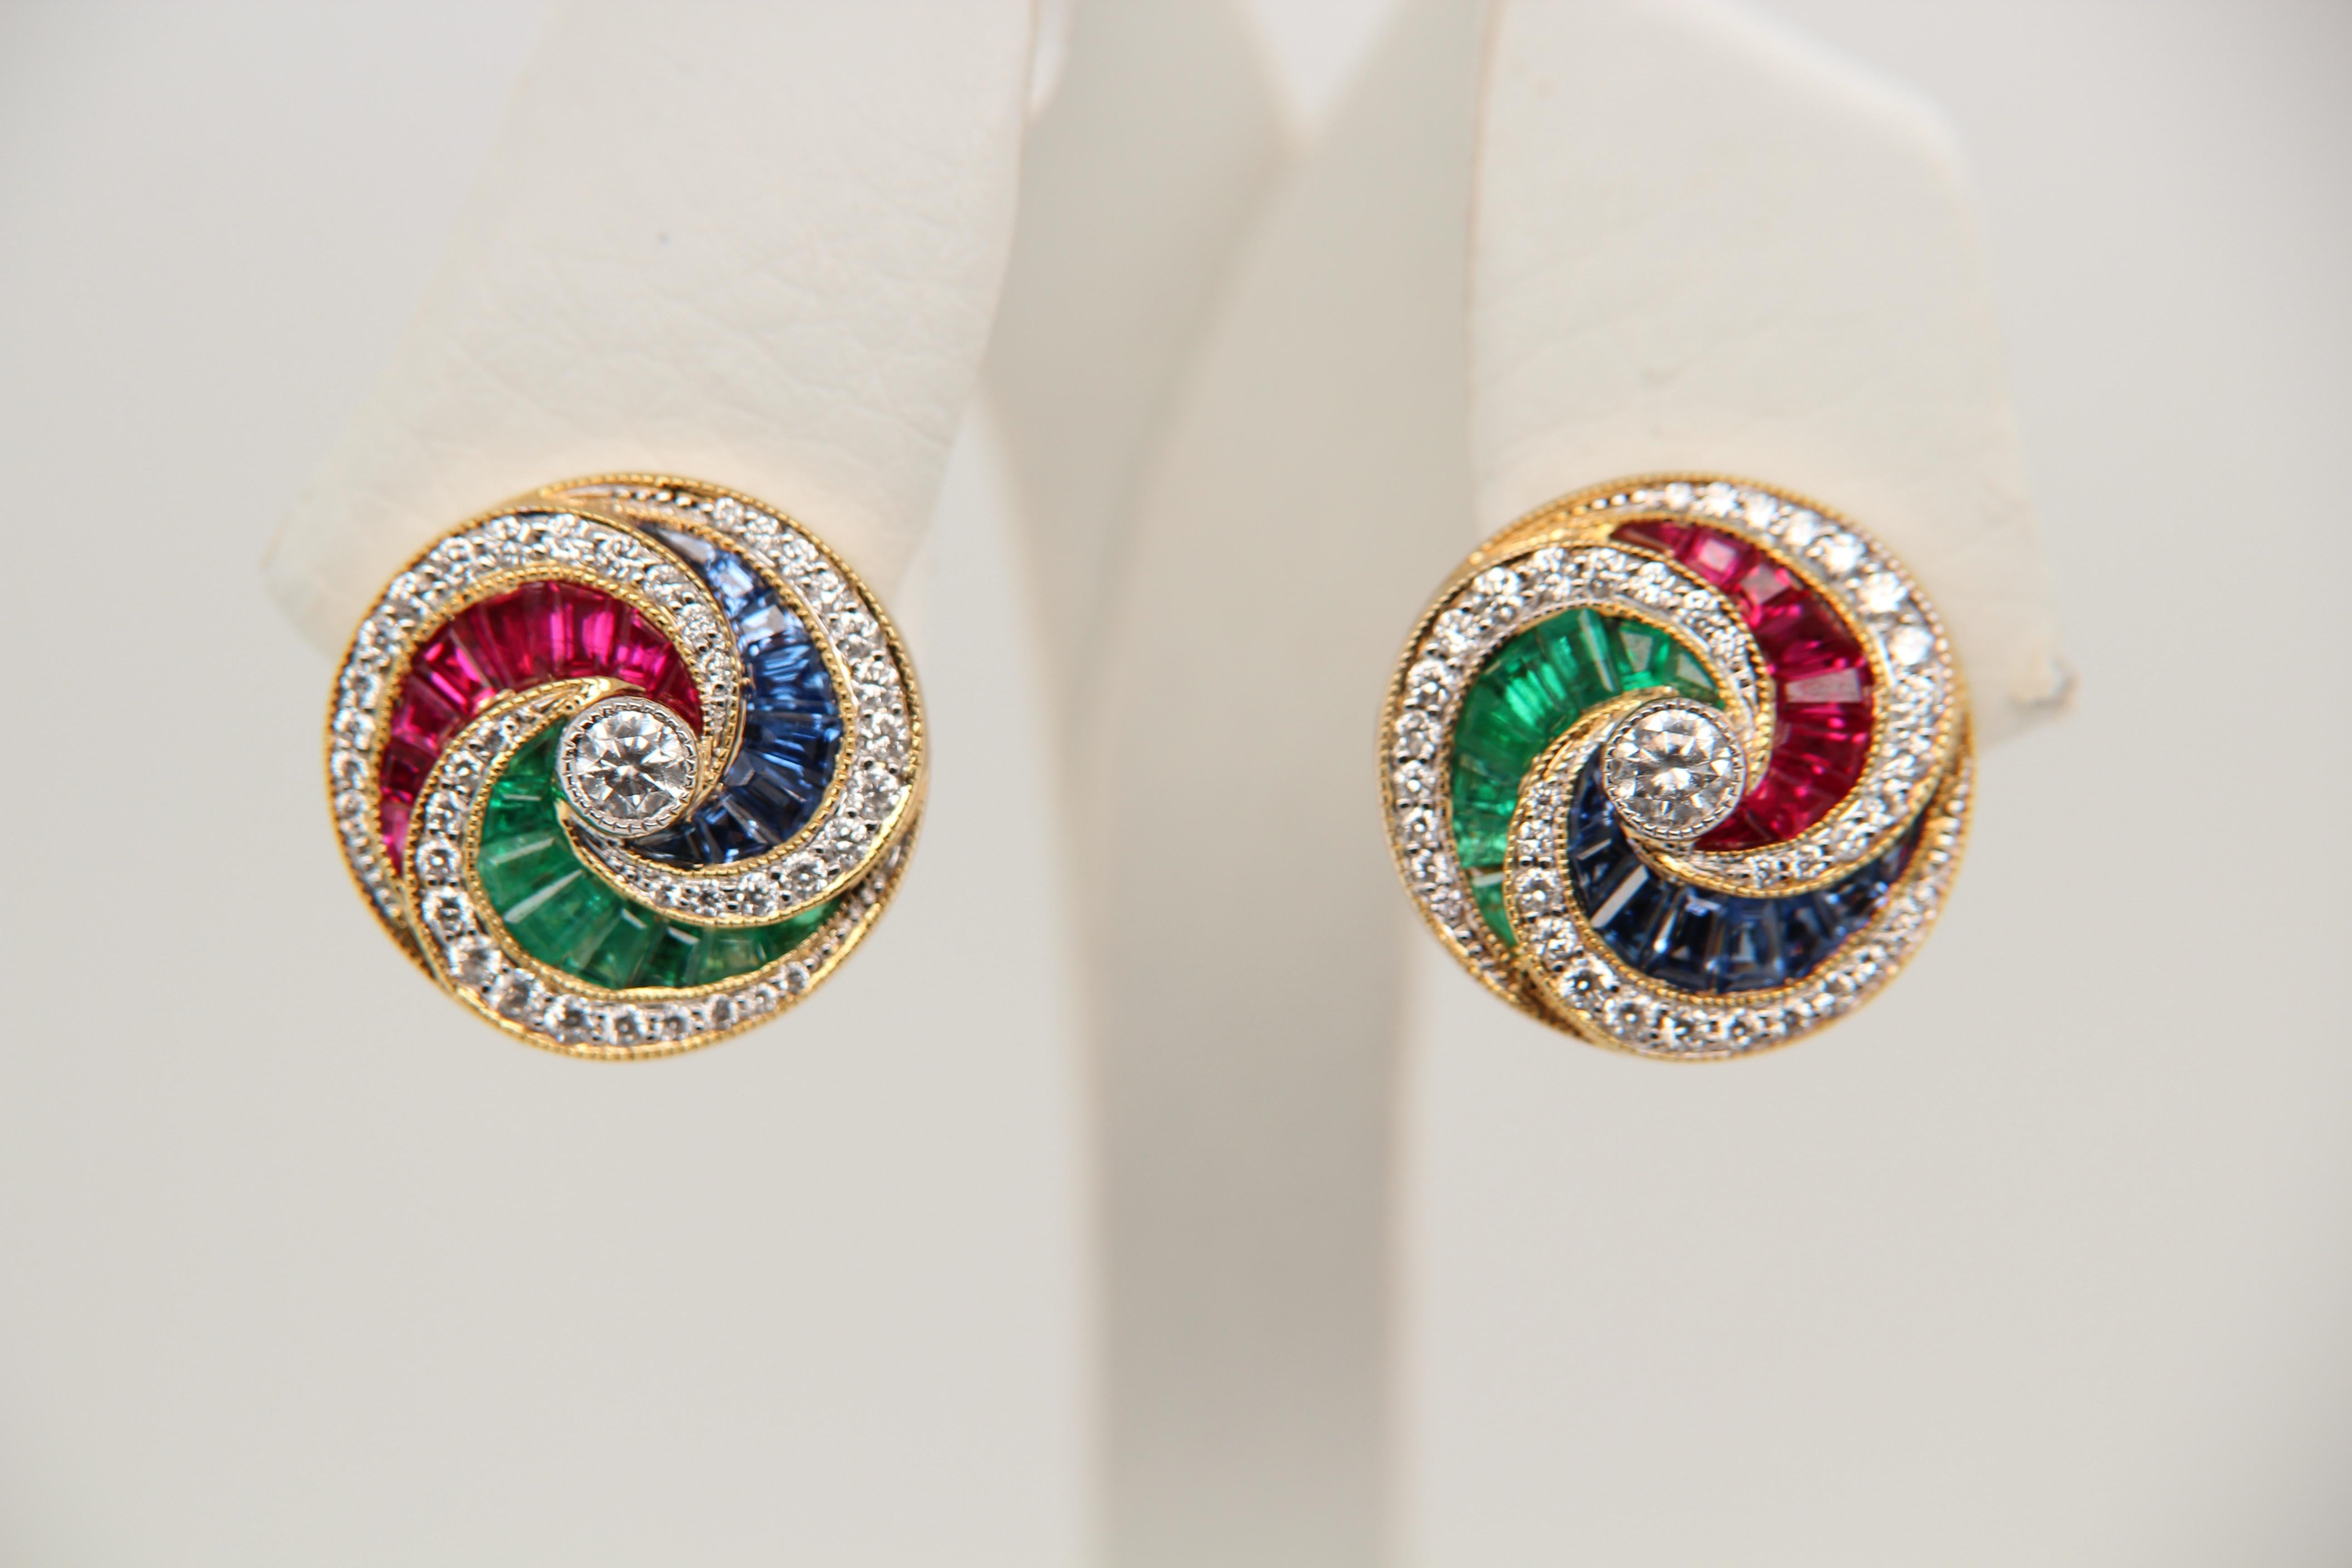 An earring consisting of 1.67 carats of color stone (rubies, emeralds, blue sapphires) and 0.68 carat diamonds. The earring is made of 18k white gold and weighs 5.29 g.